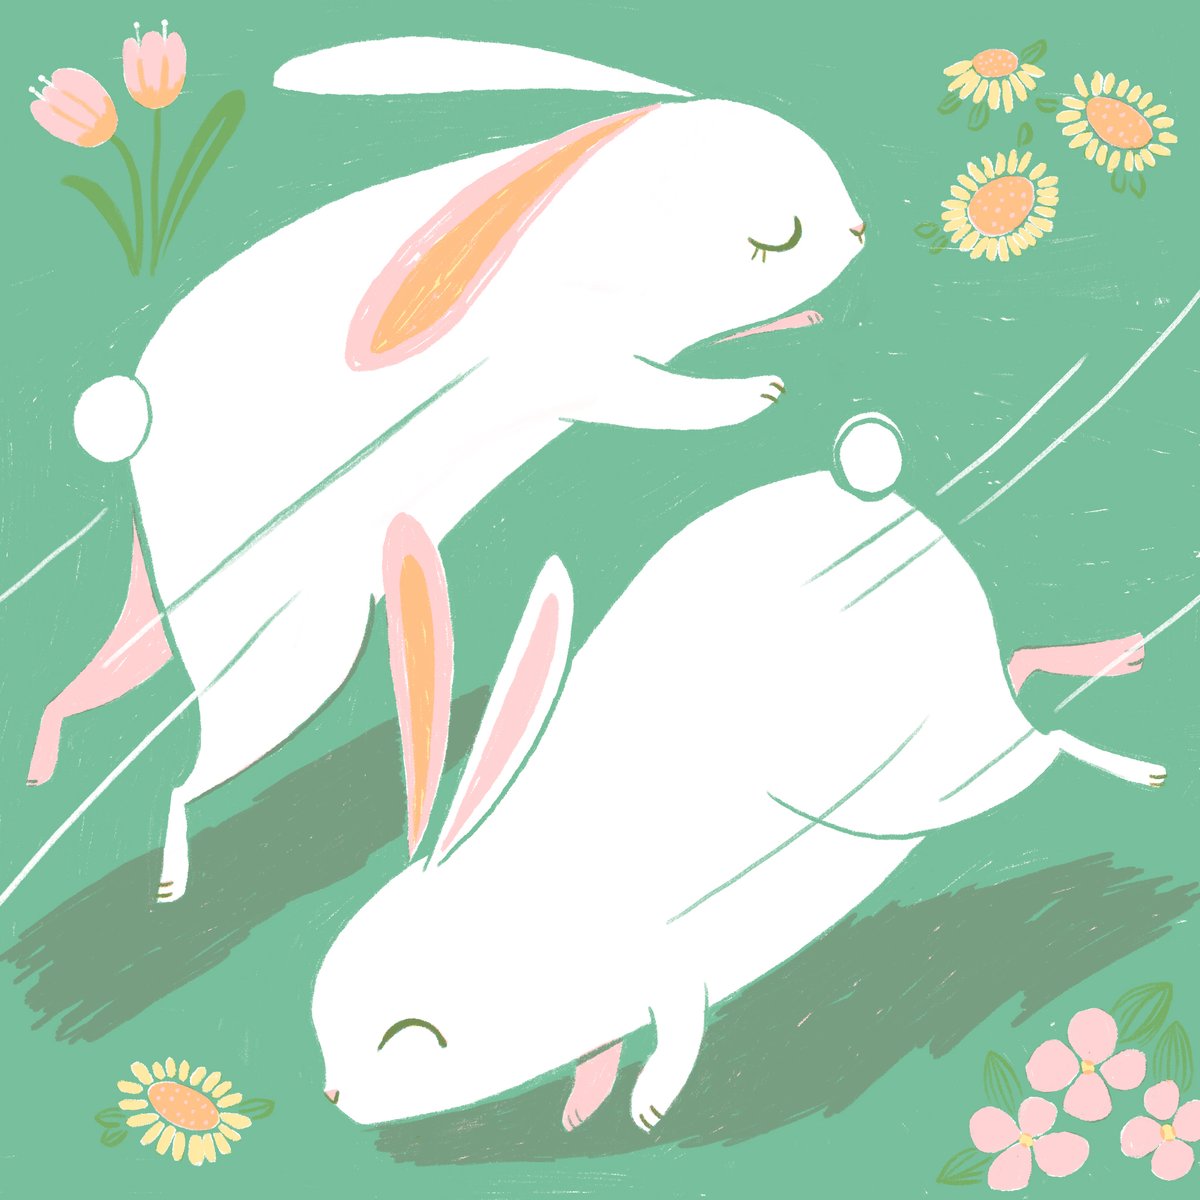 Reminder: While bunnies frolic, hares fight like boxers. Happy Easter.